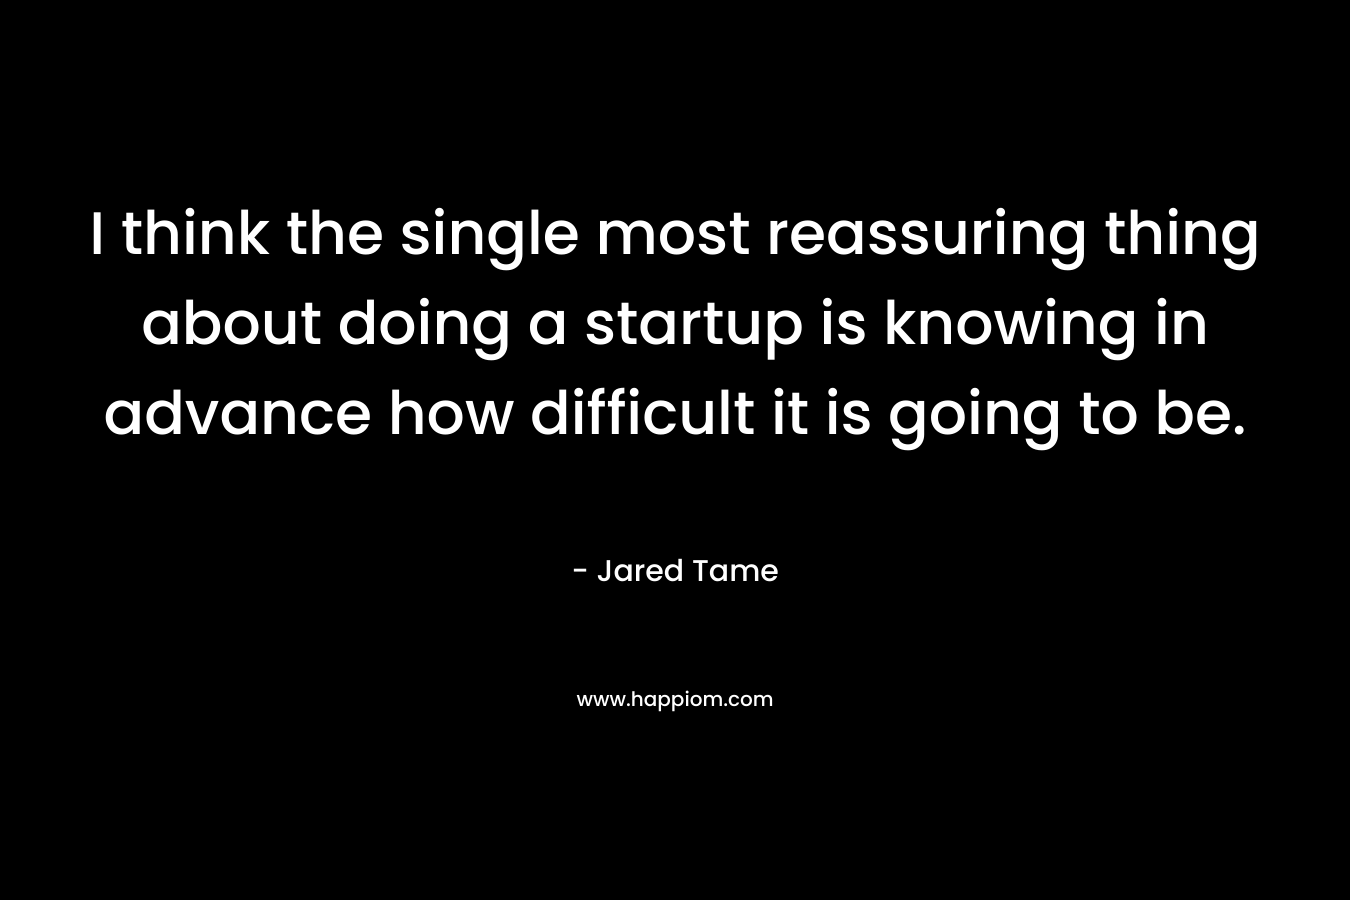 I think the single most reassuring thing about doing a startup is knowing in advance how difficult it is going to be. – Jared Tame